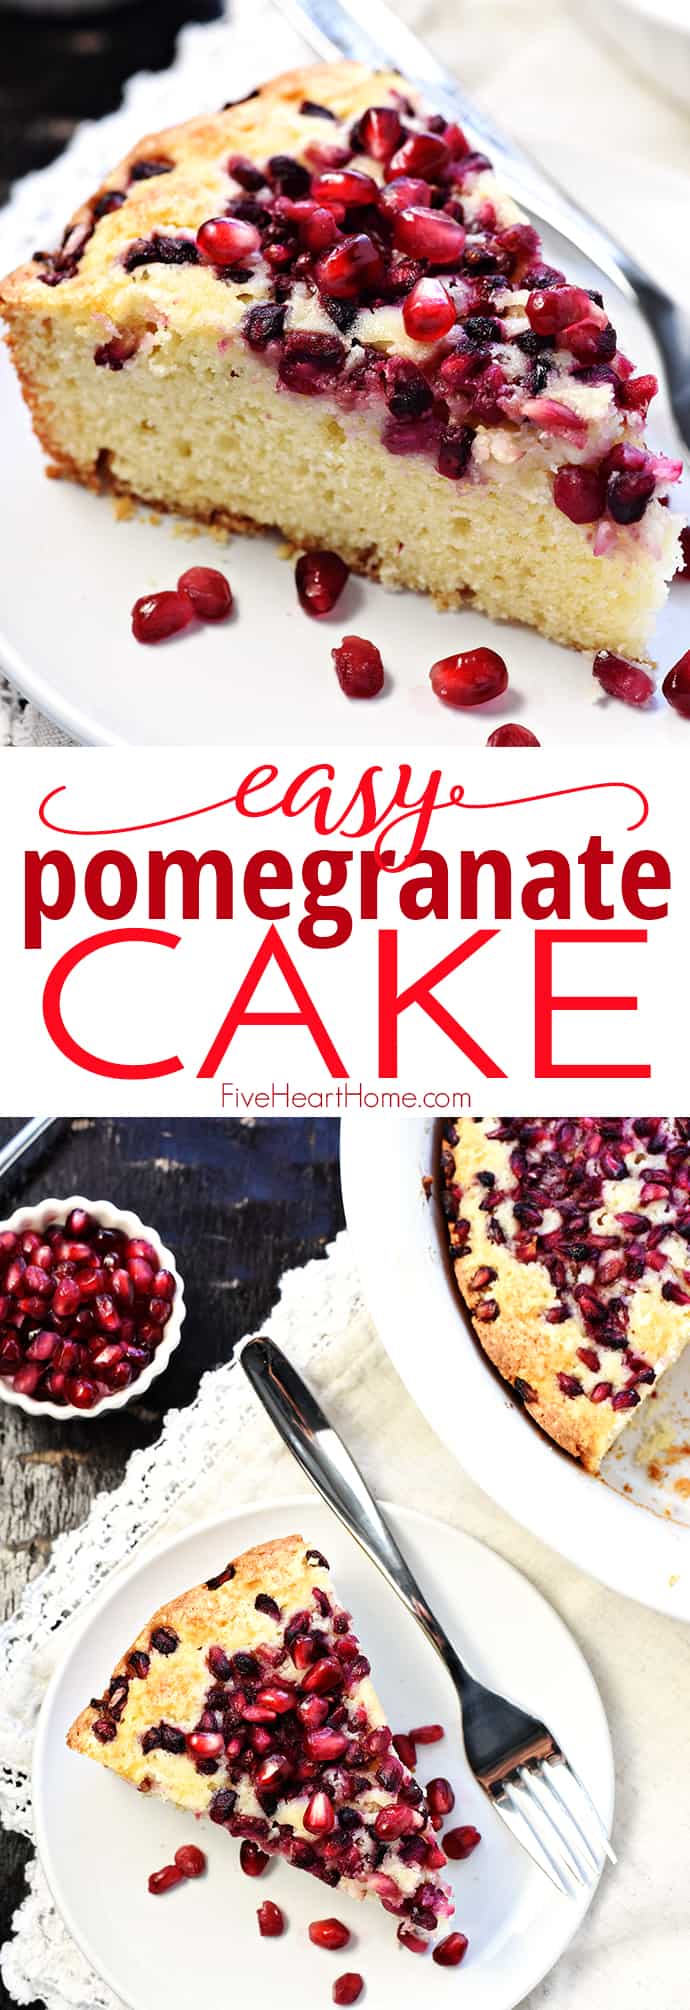 Pomegranate Cake ~ this easy and delicious recipe features a simple golden batter topped with juicy pomegranate arils and baked to sweet, tender perfection! | FiveHeartHome.com via @fivehearthome